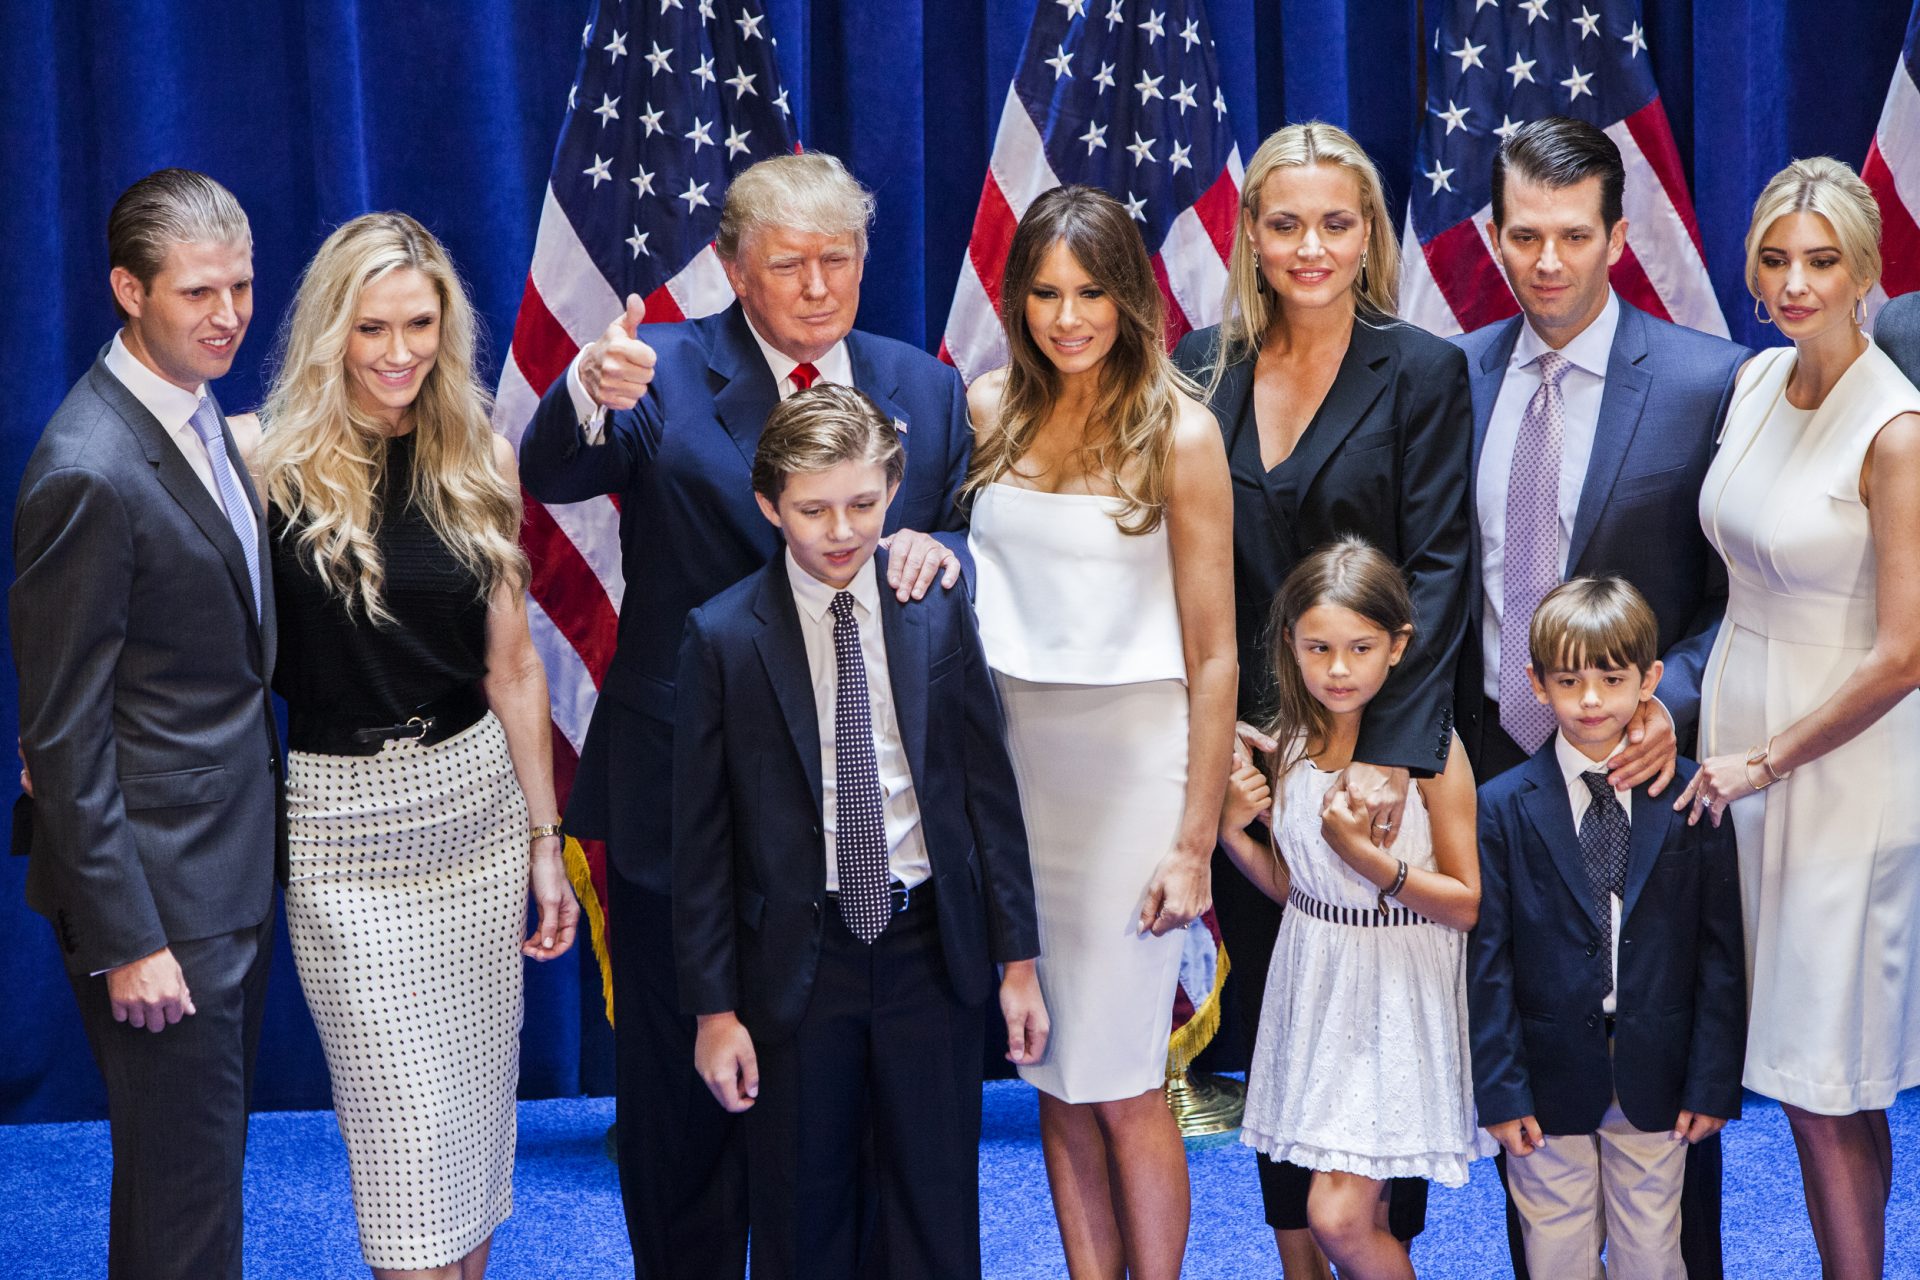 You probably haven't heard of the most powerful member of the Trump family